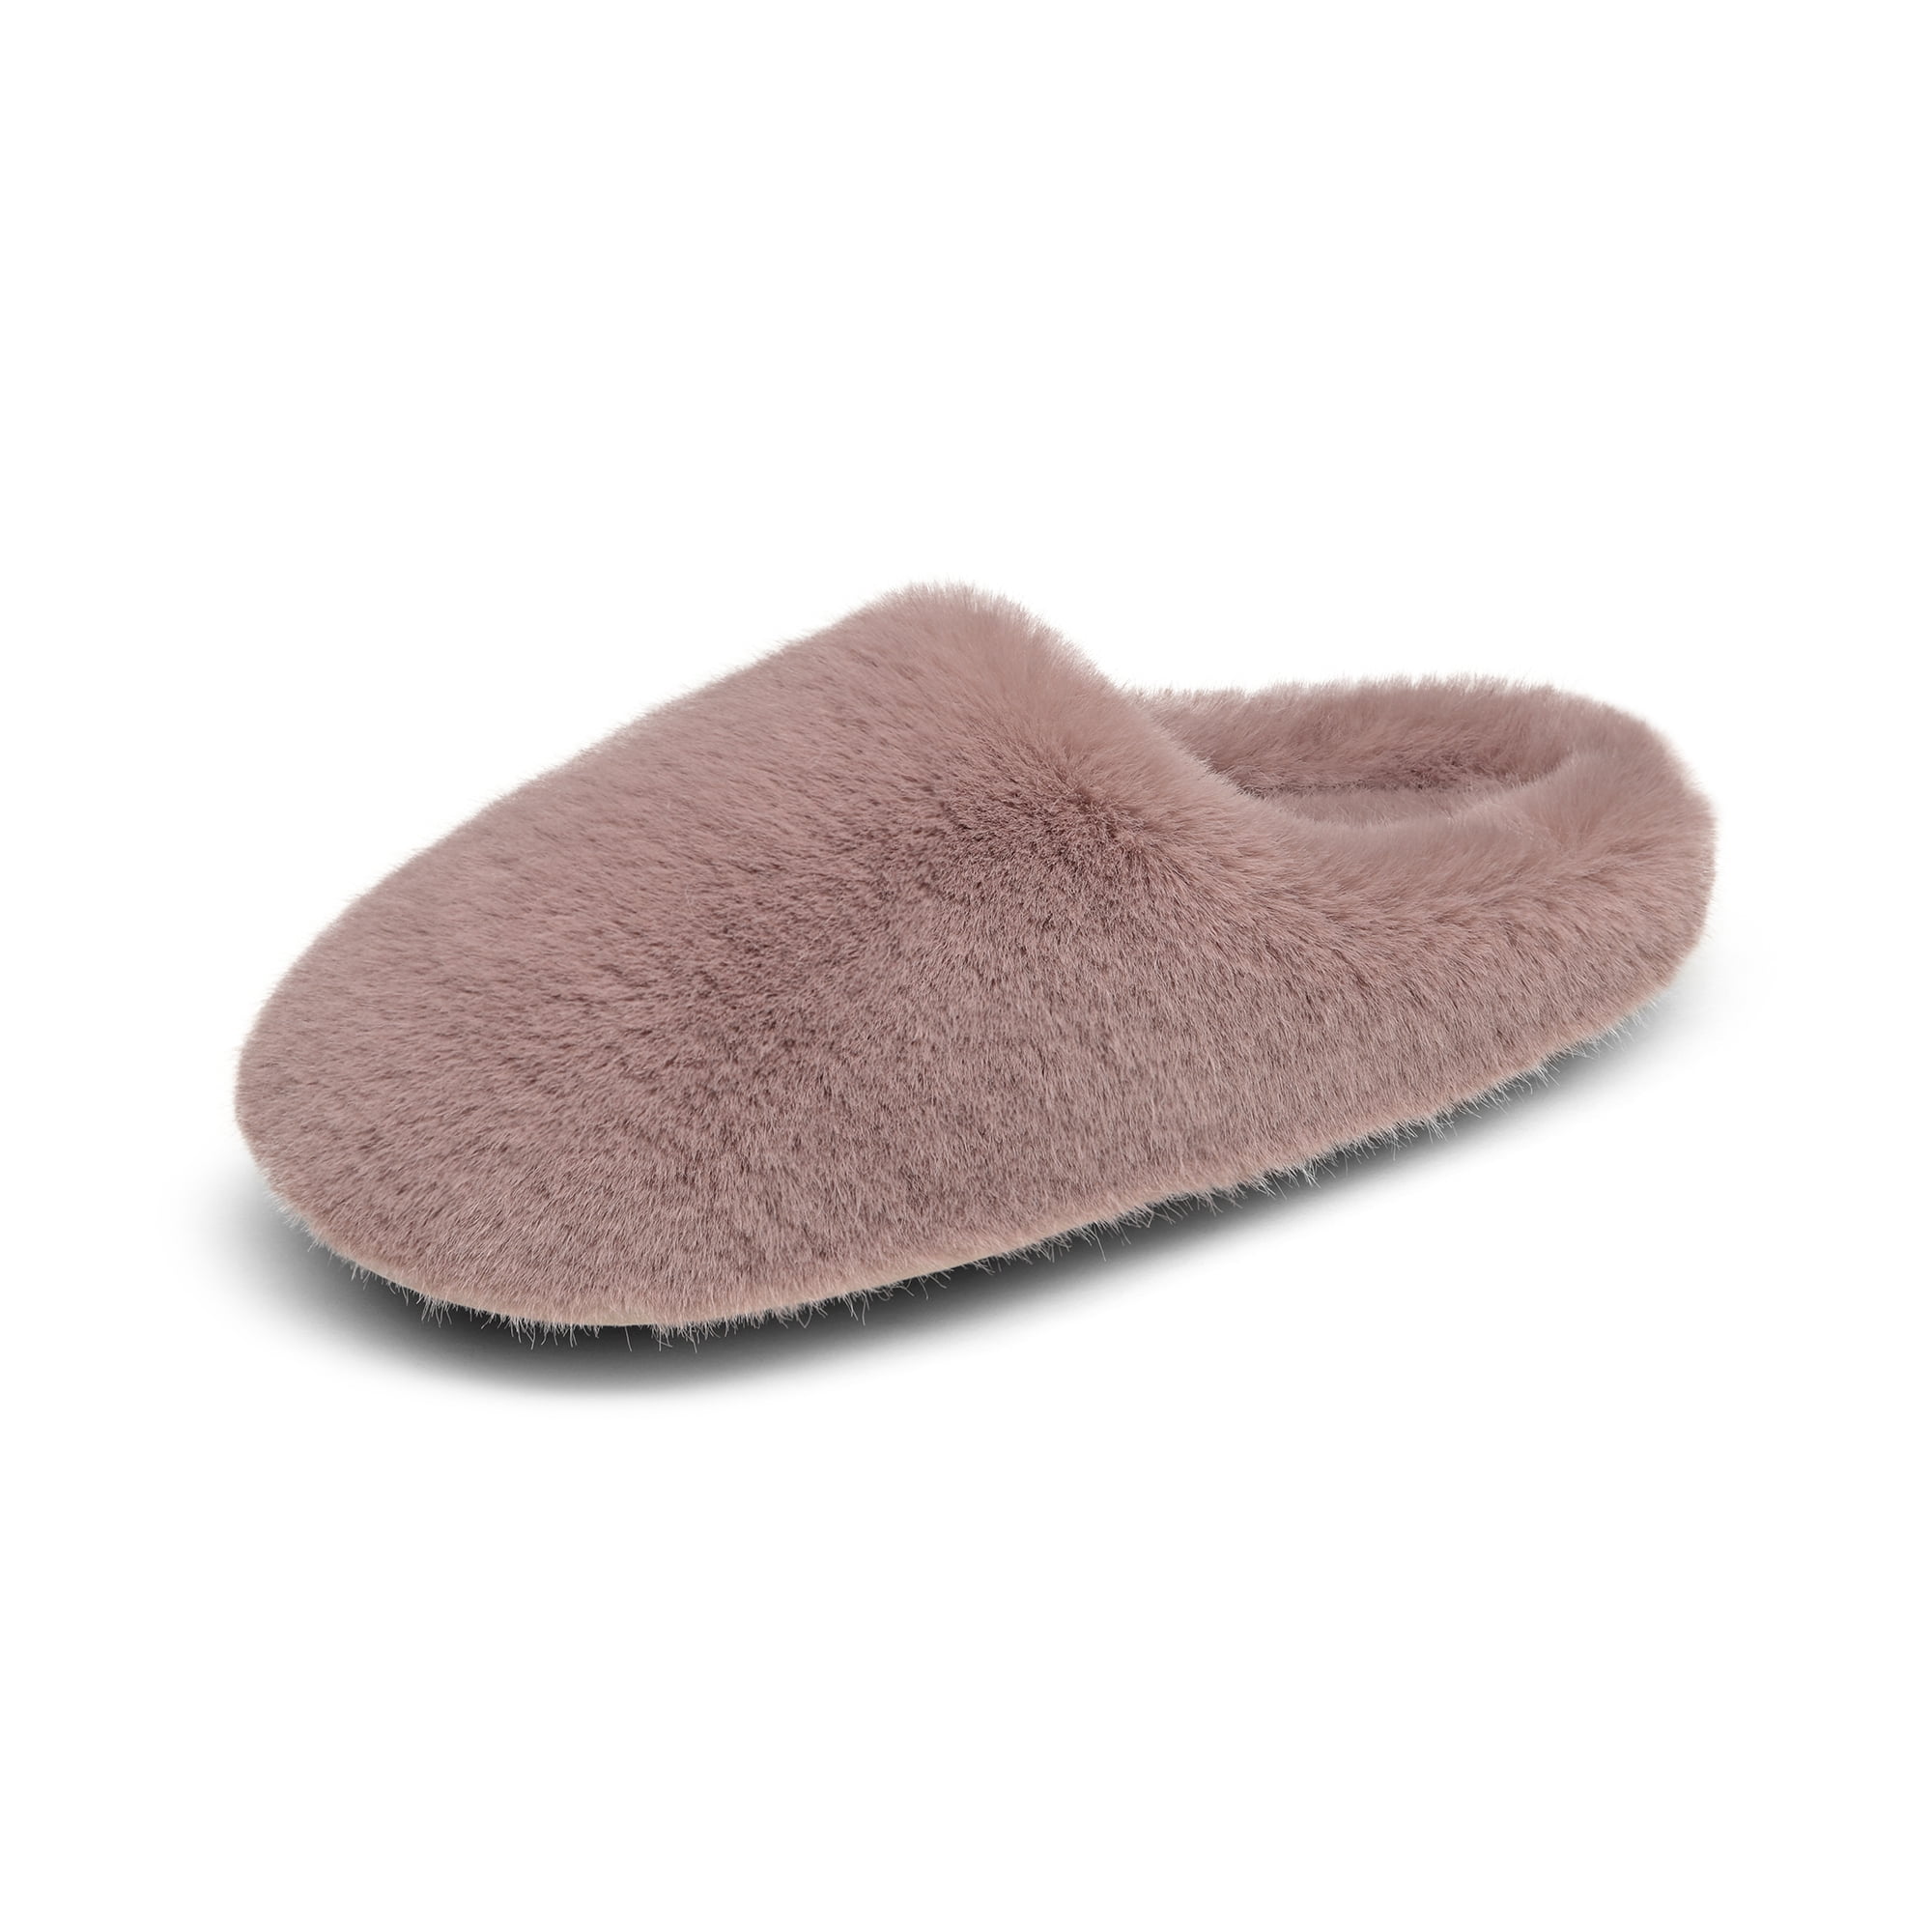 DREAM PAIRS Plush Fuzzy Slippers For Women Slip on Indoor Winter House ...